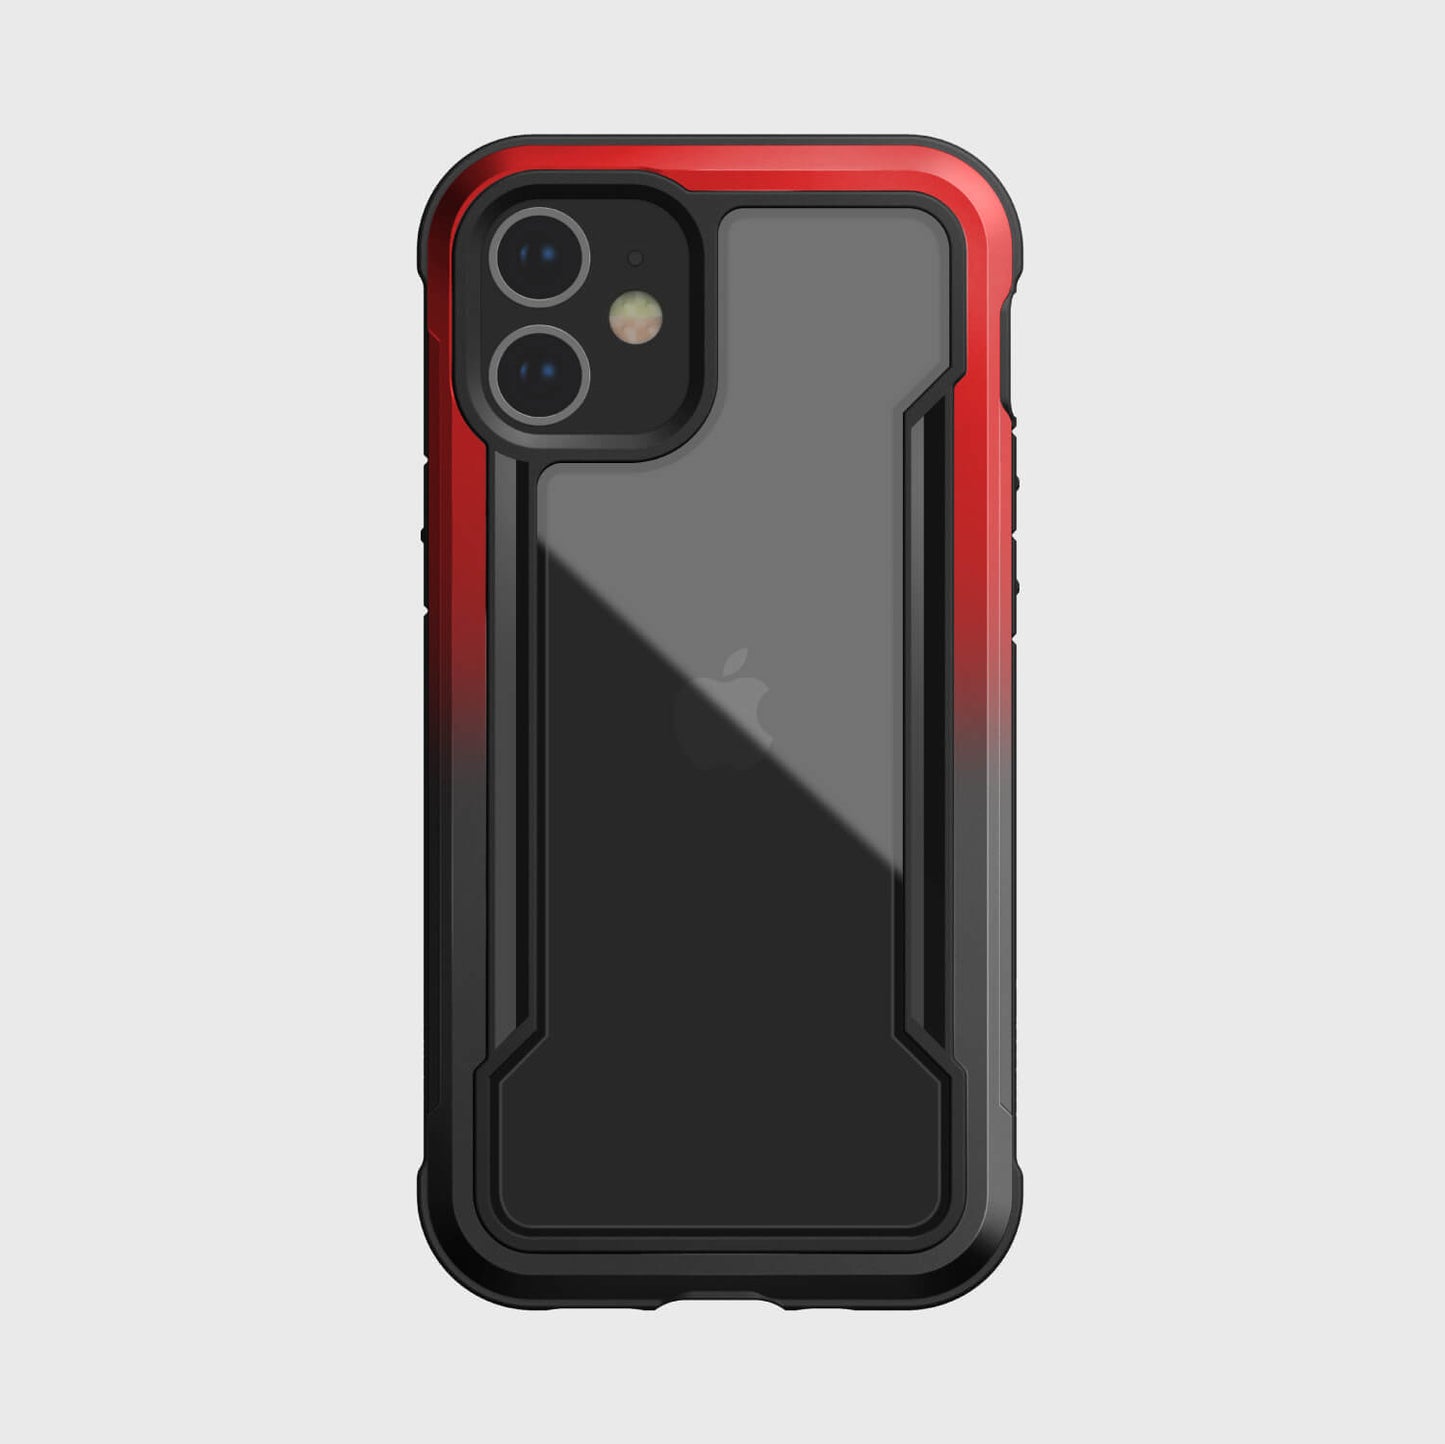 The back of an iPhone 12 Mini Case - SHIELD in red and black by Raptic.